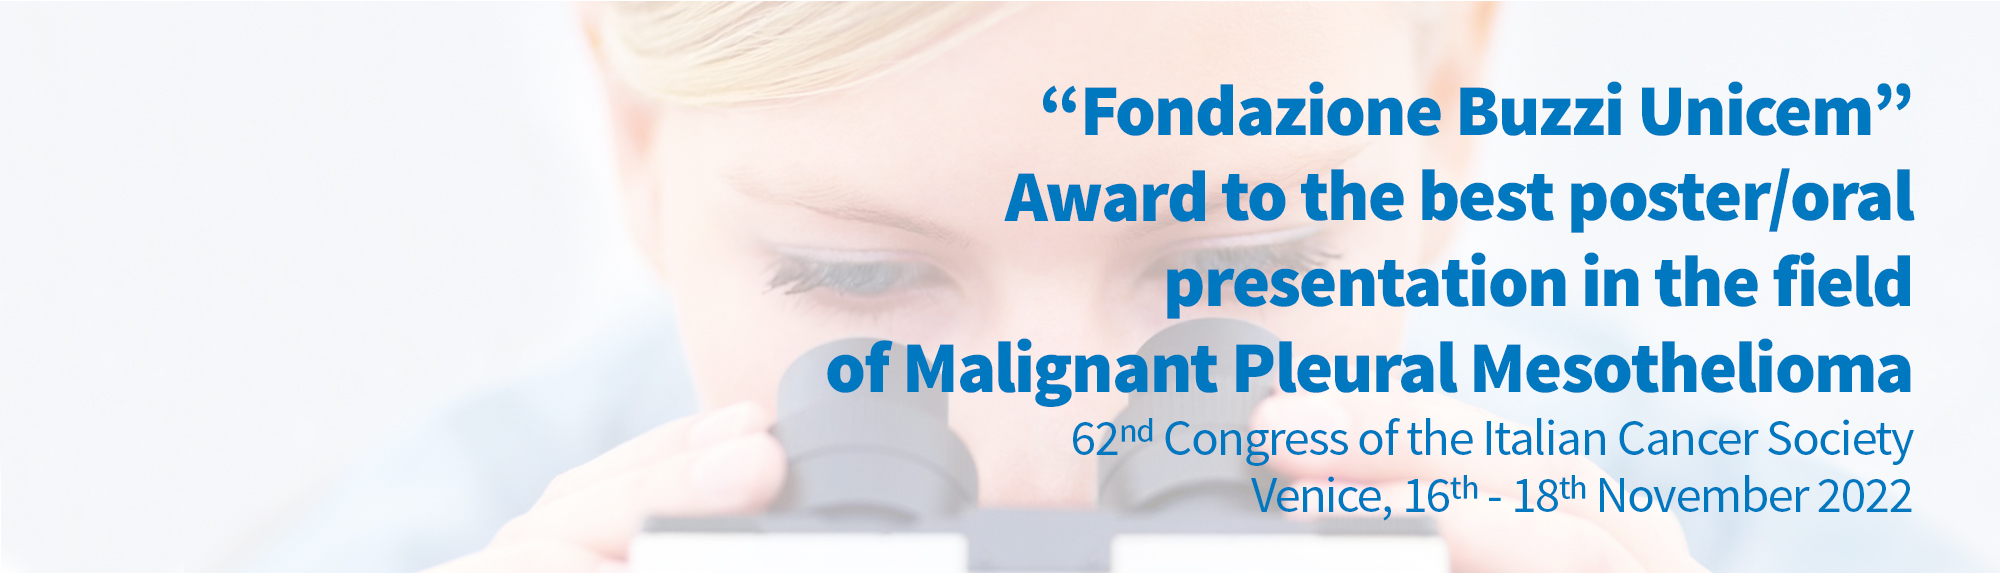 “Fondazione Buzzi Unicem” Award to the best poster / oral presentation in the field of Malignant Pleural Mesothelioma